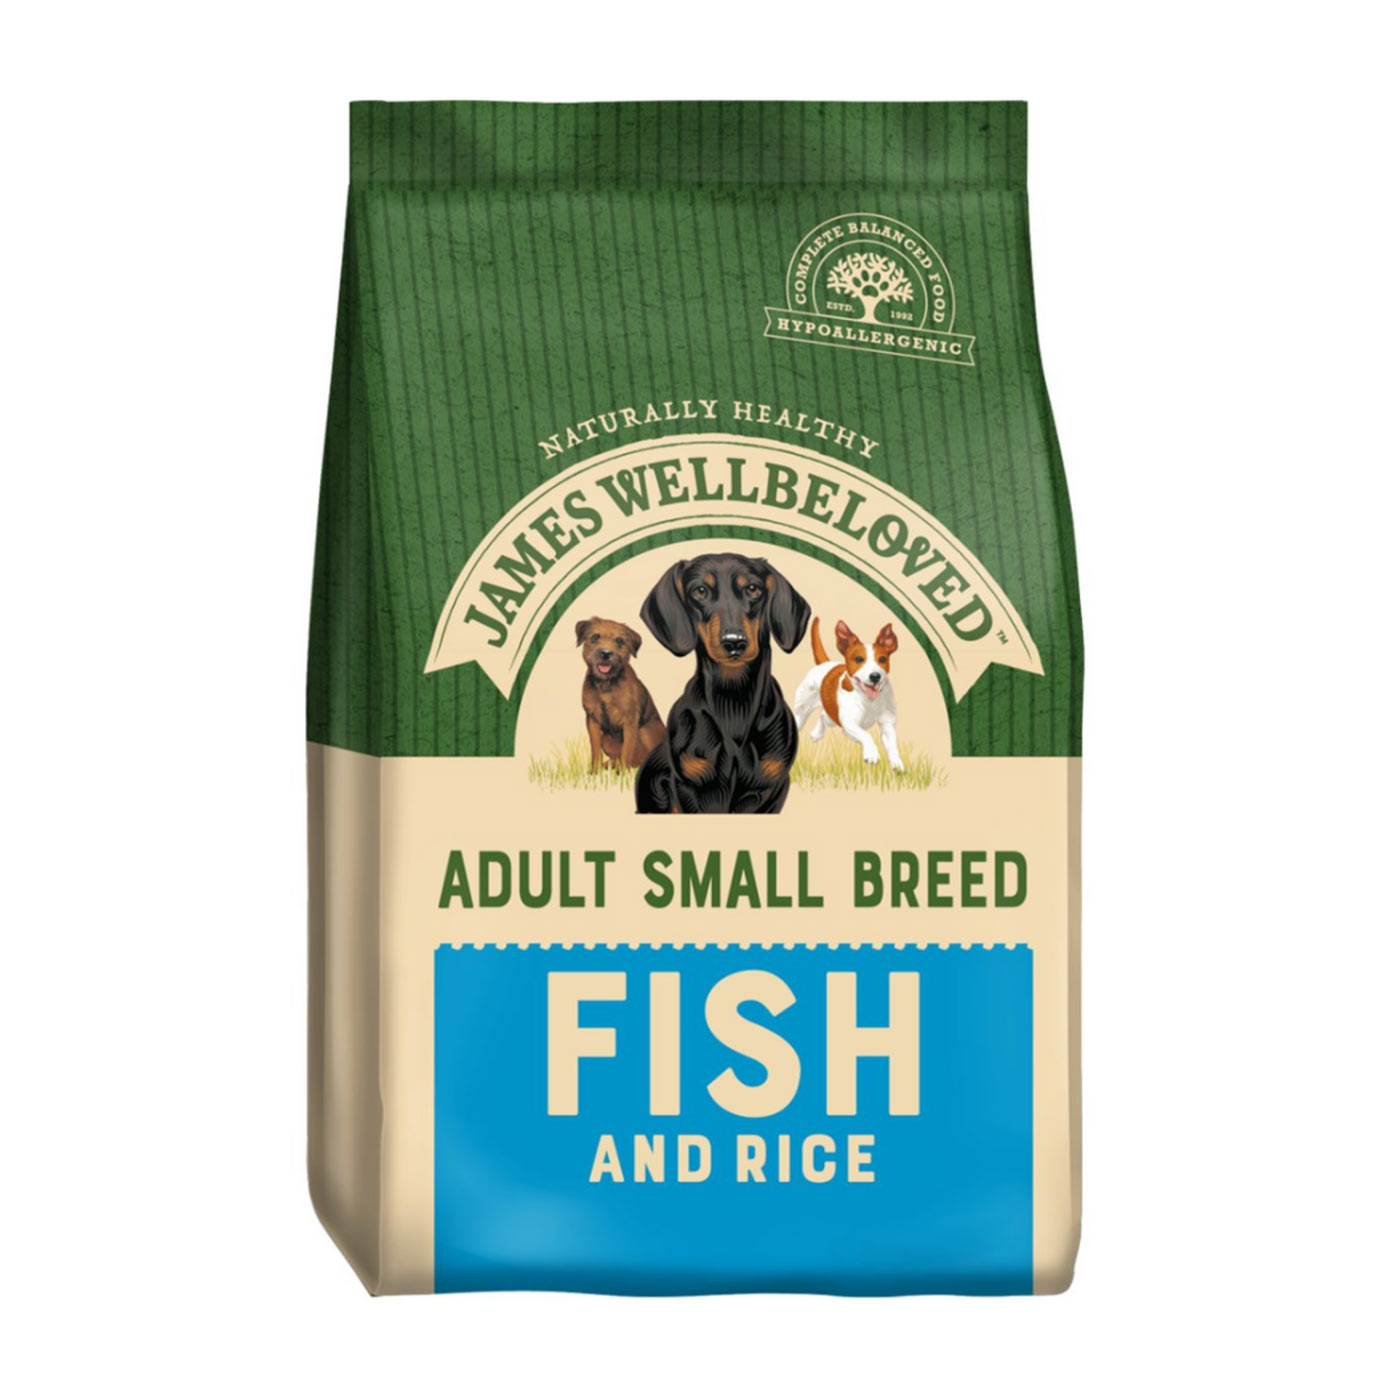 James Wellbeloved Fish & Rice Adult Small Breed Dog Food